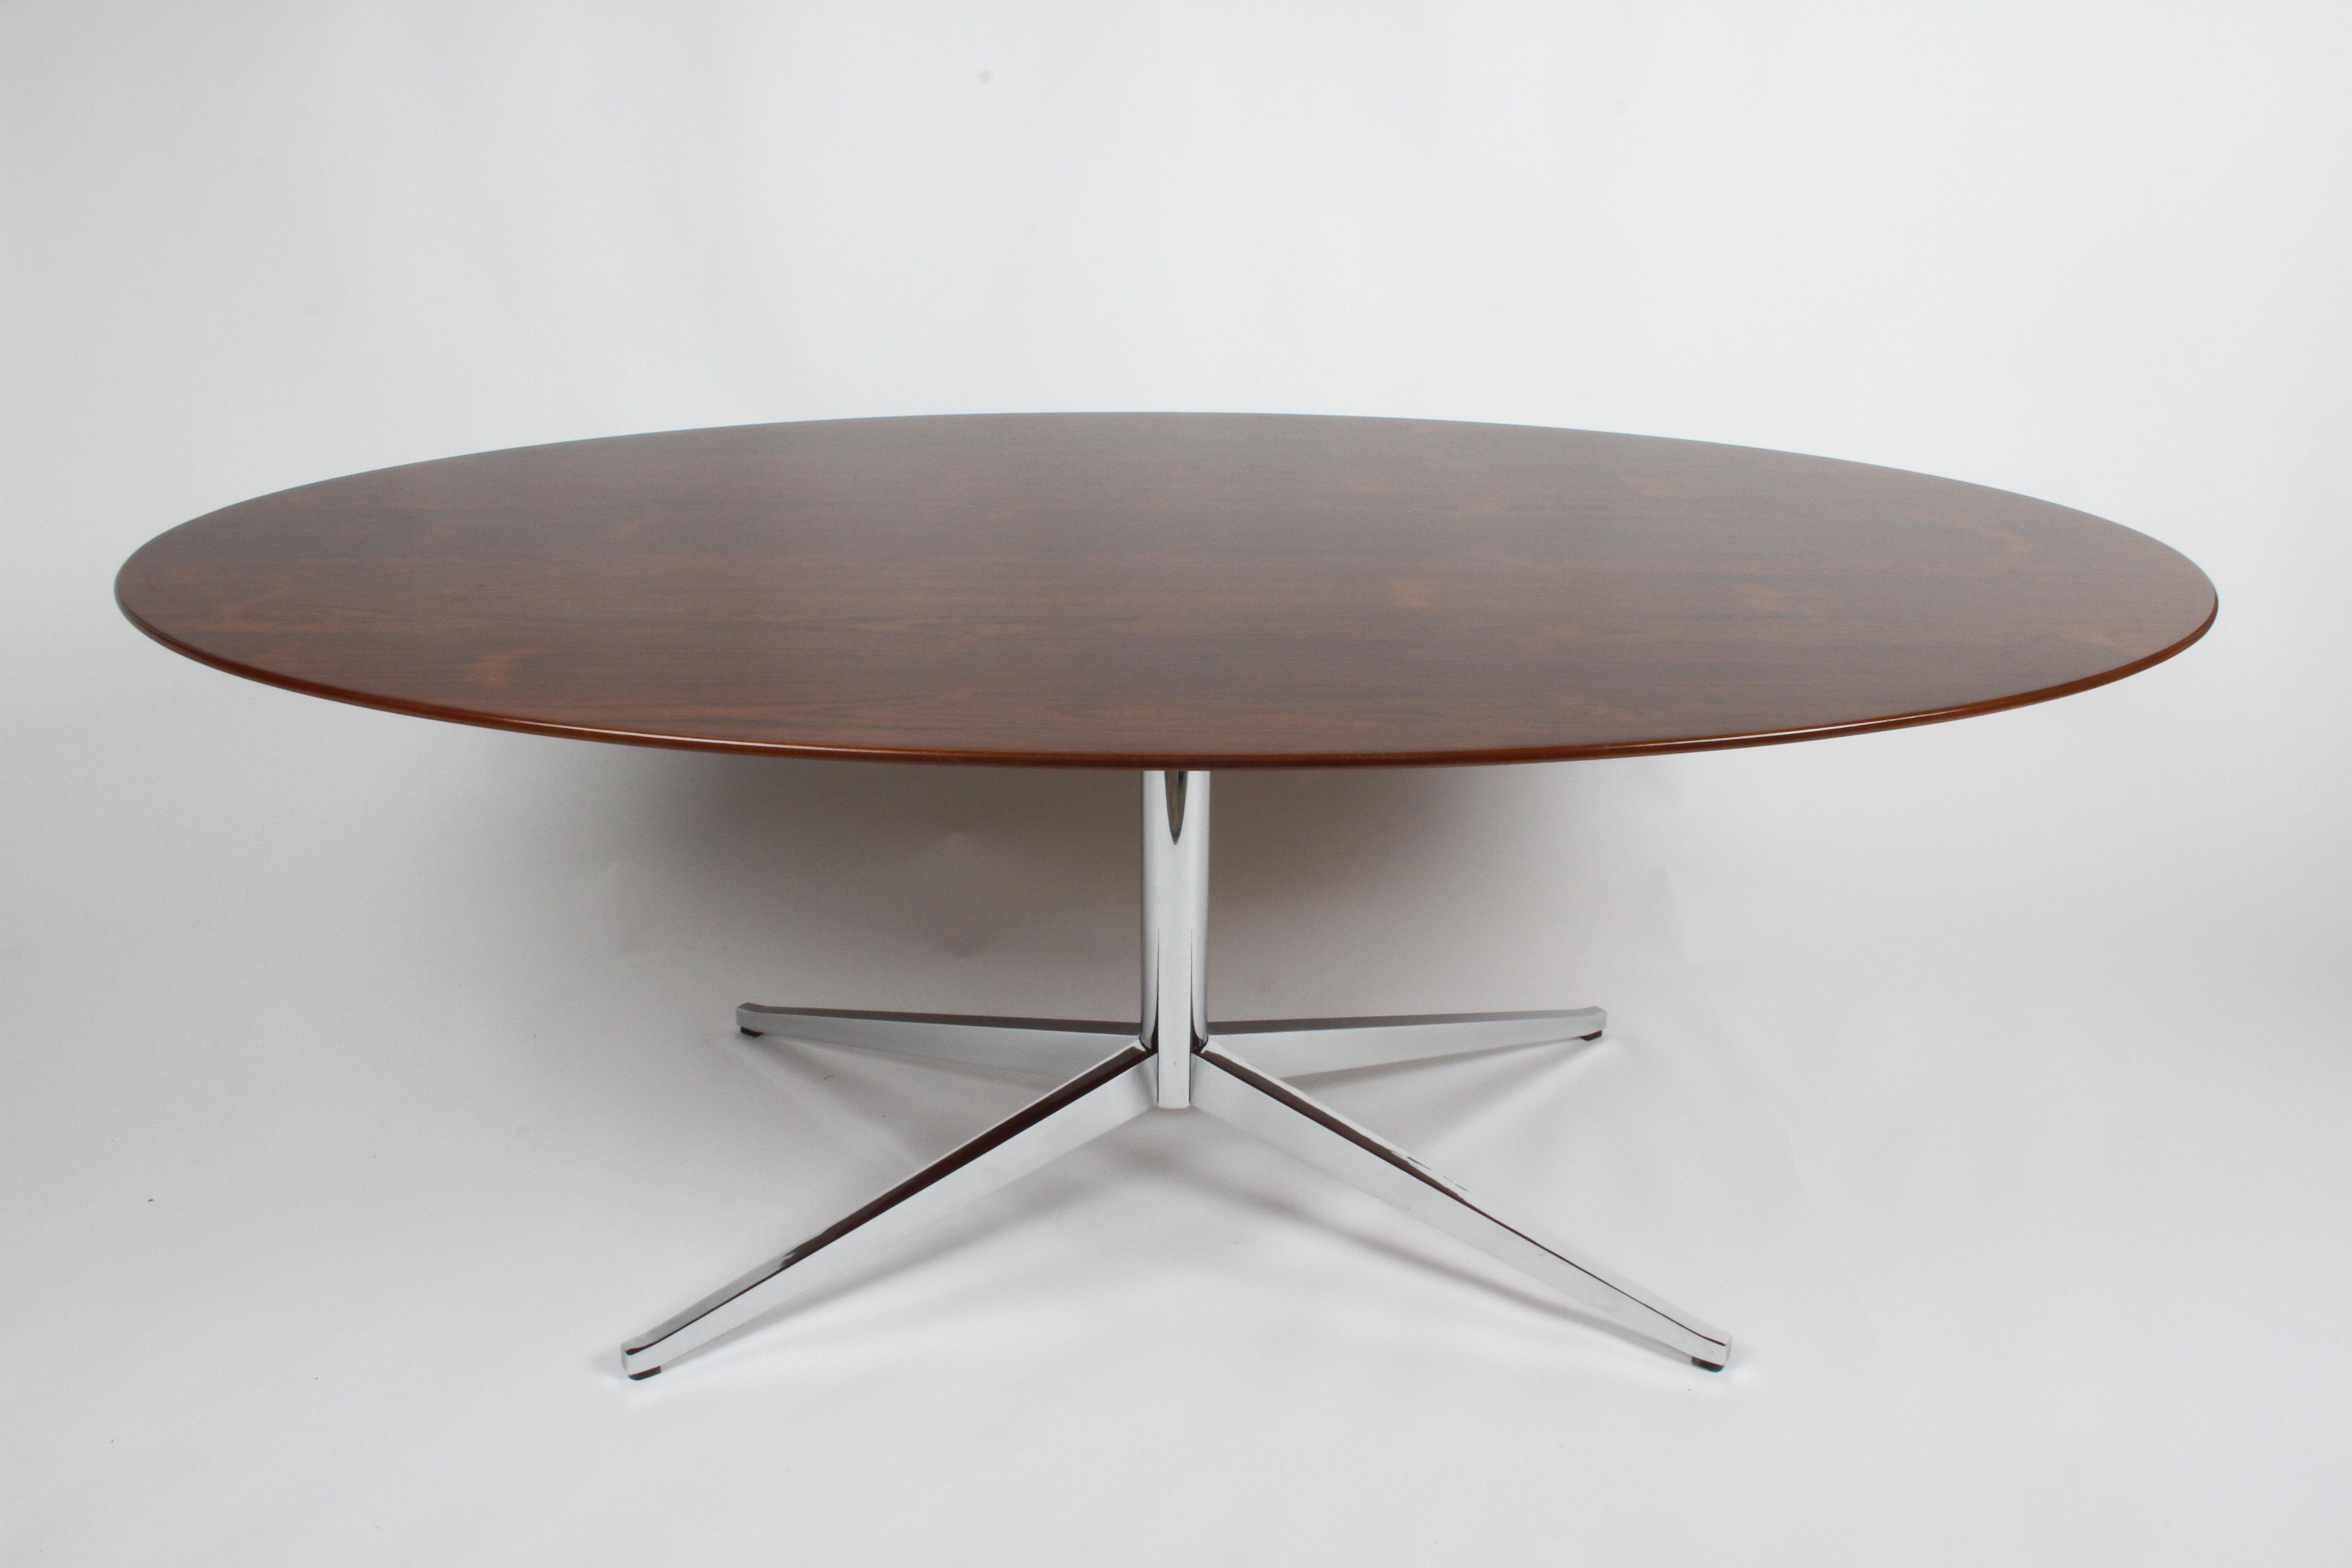 Restored Mid-Century Modern vintage Florence Knoll oval top dining table / conference or desk in rare book matched rosewood veneer on chrome star base. The rosewood has been refinished, the heavy steel chrome plated four legs have been re-chromed.